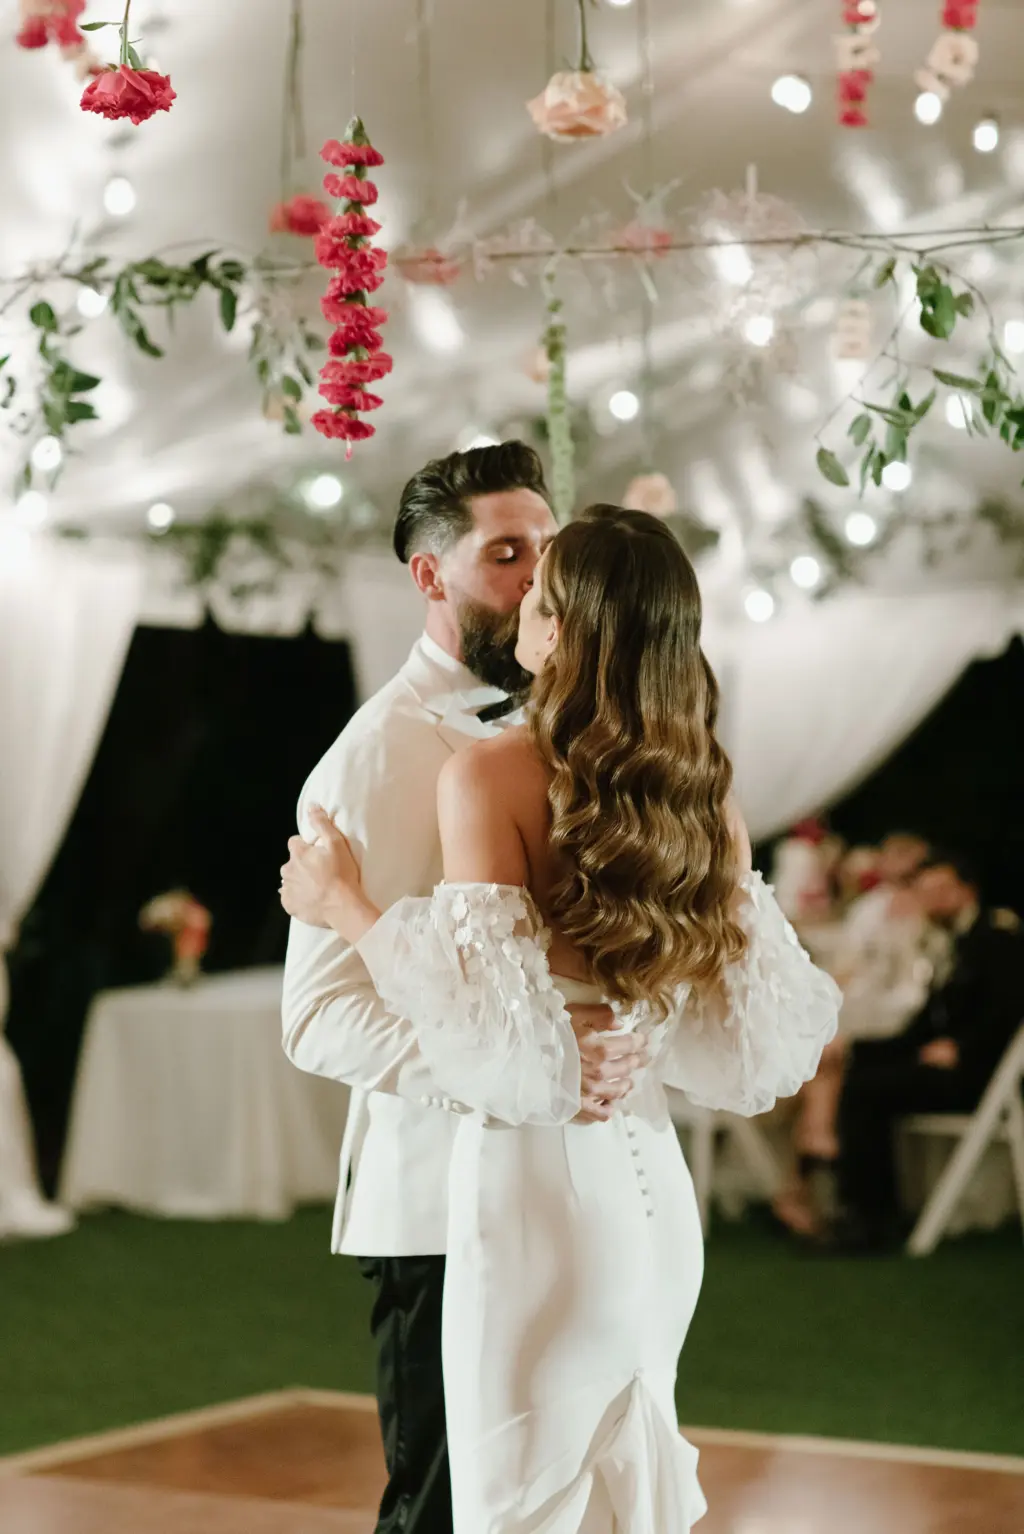 Bride and Groom First Dance Wedding Portrait | White and Pink Tented Garden Wedding Reception Inspiration | Hanging Roses, Carnations, and Greenery, and Market Lights Decor Ideas | St. Pete DJ Graingertainment